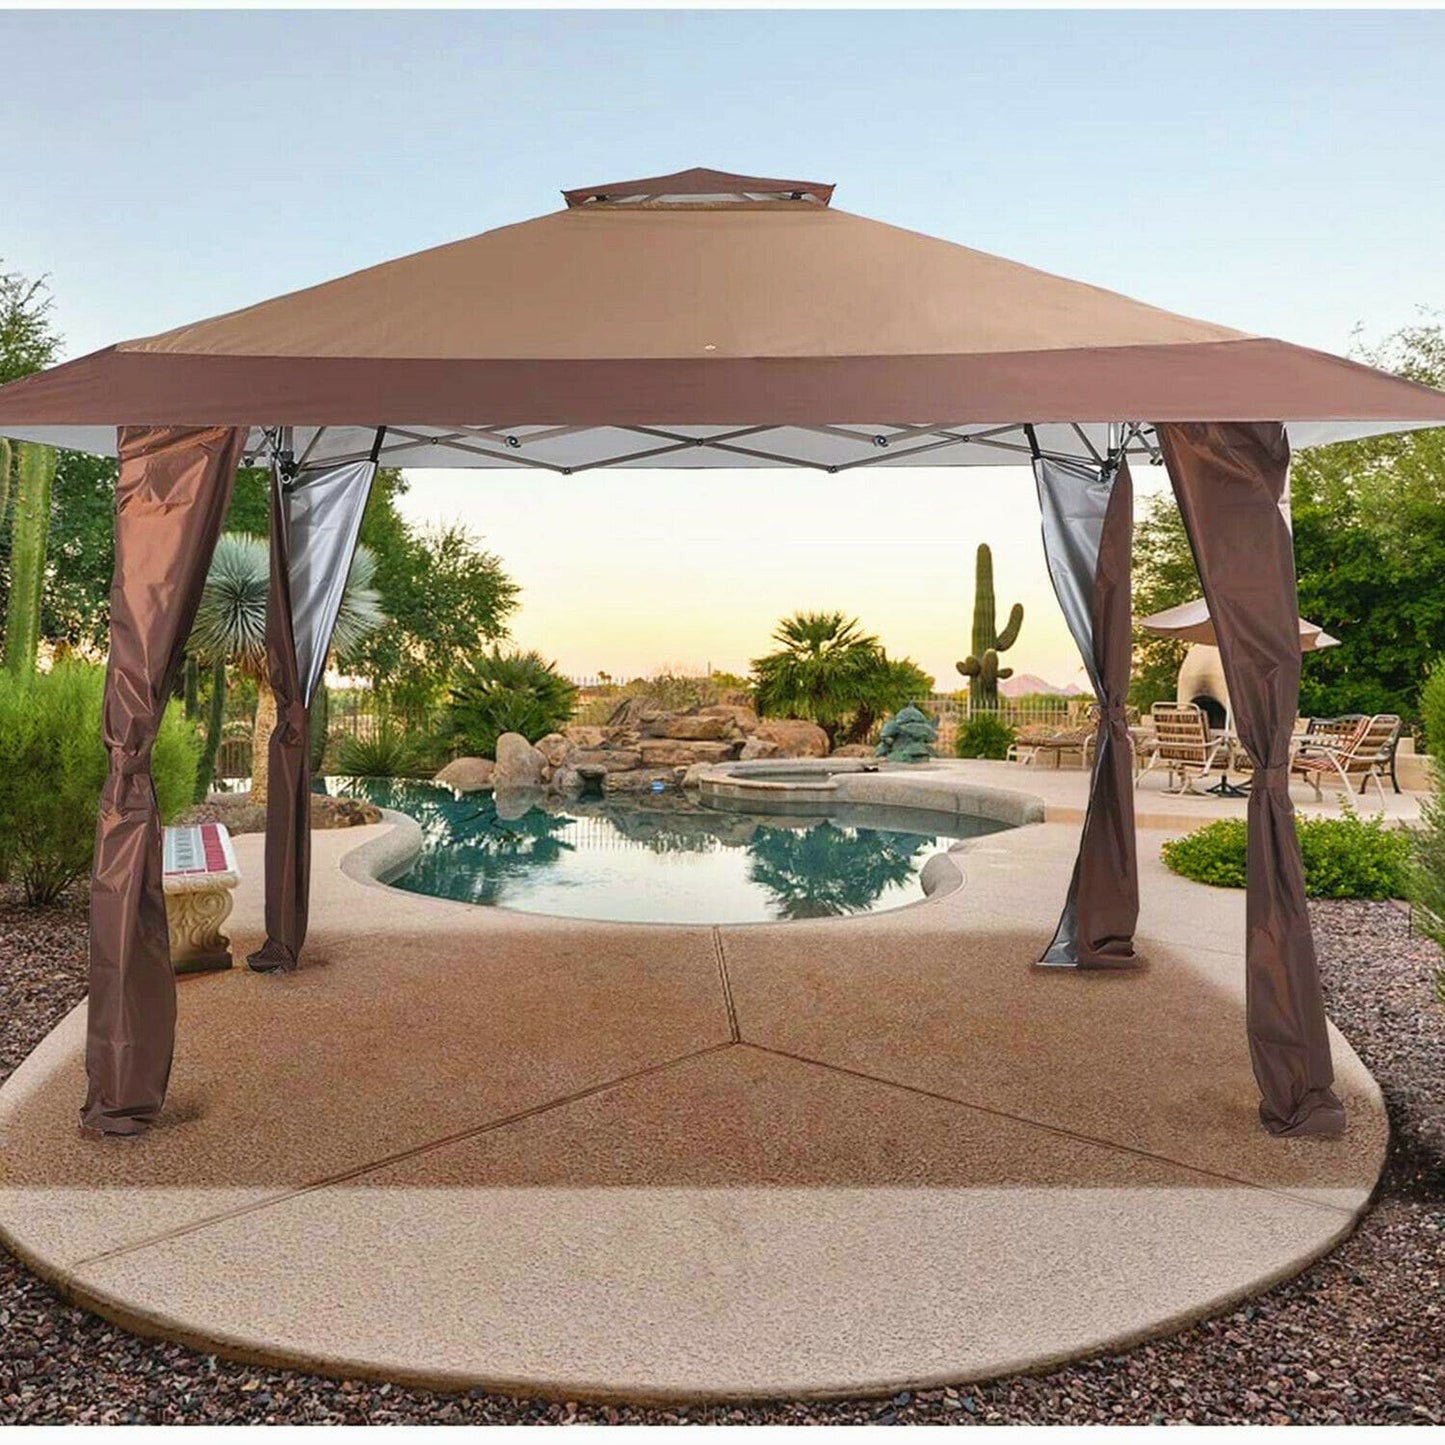 Gazebo Canopy Pop Up - 13x13 ft Outdoor Canopy Tent For Patio - Garden Party Wedding Canopy Tent